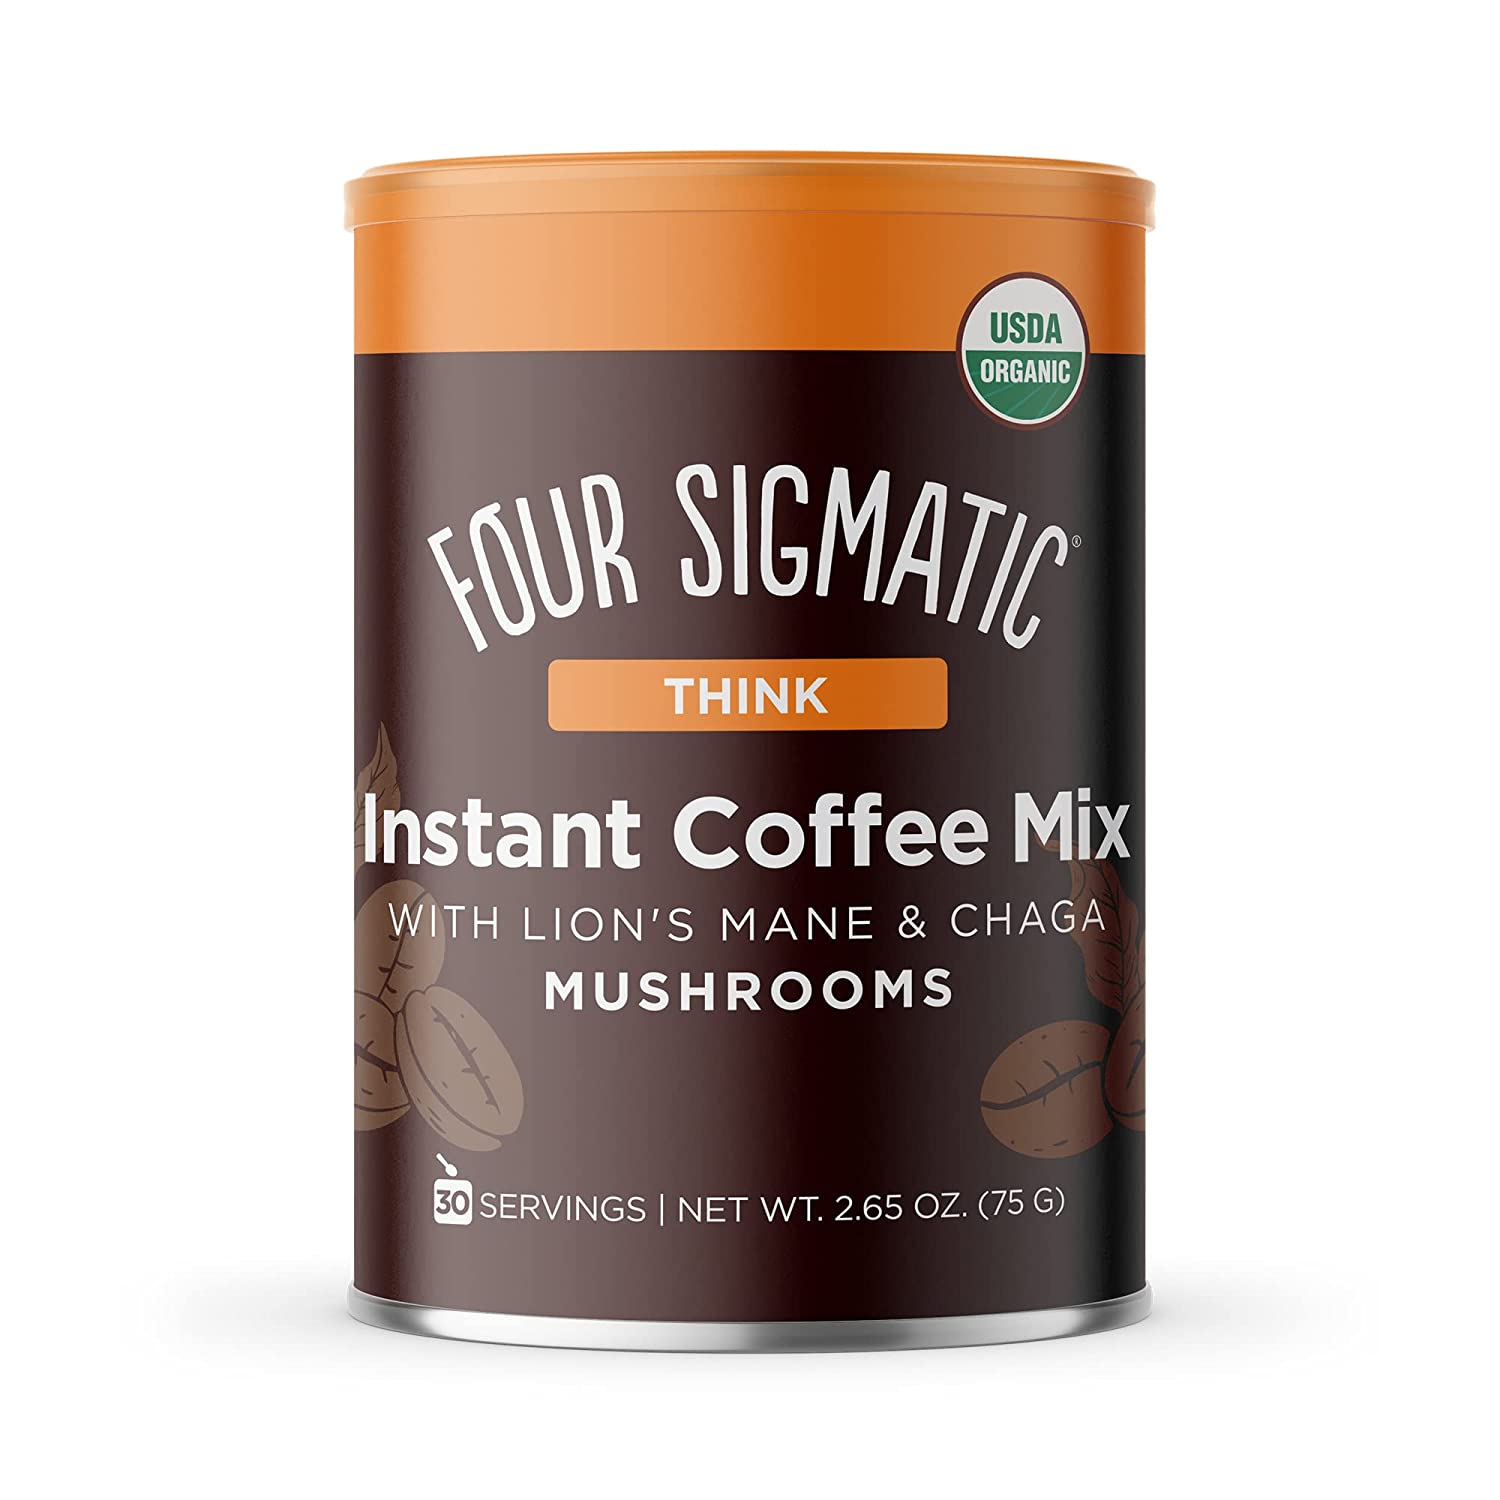 Four Sigmatic Instant Coffee with Lion's Mane and Chaga